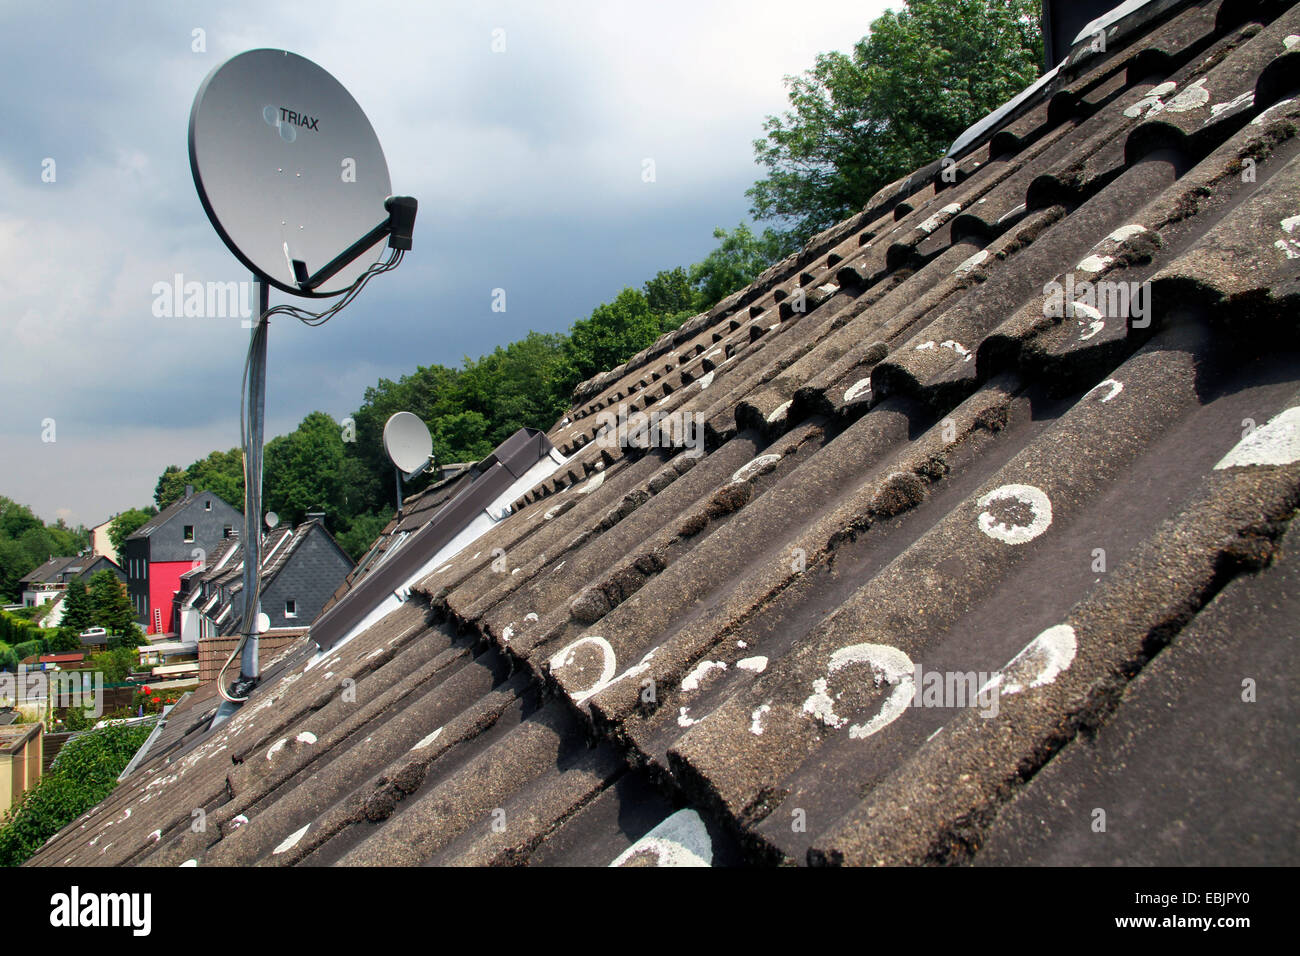 satellite dish on a roof with lichened old roof tiles, Germany, Nordrhein Westfalen, Ruhr Area, Essen Stock Photo